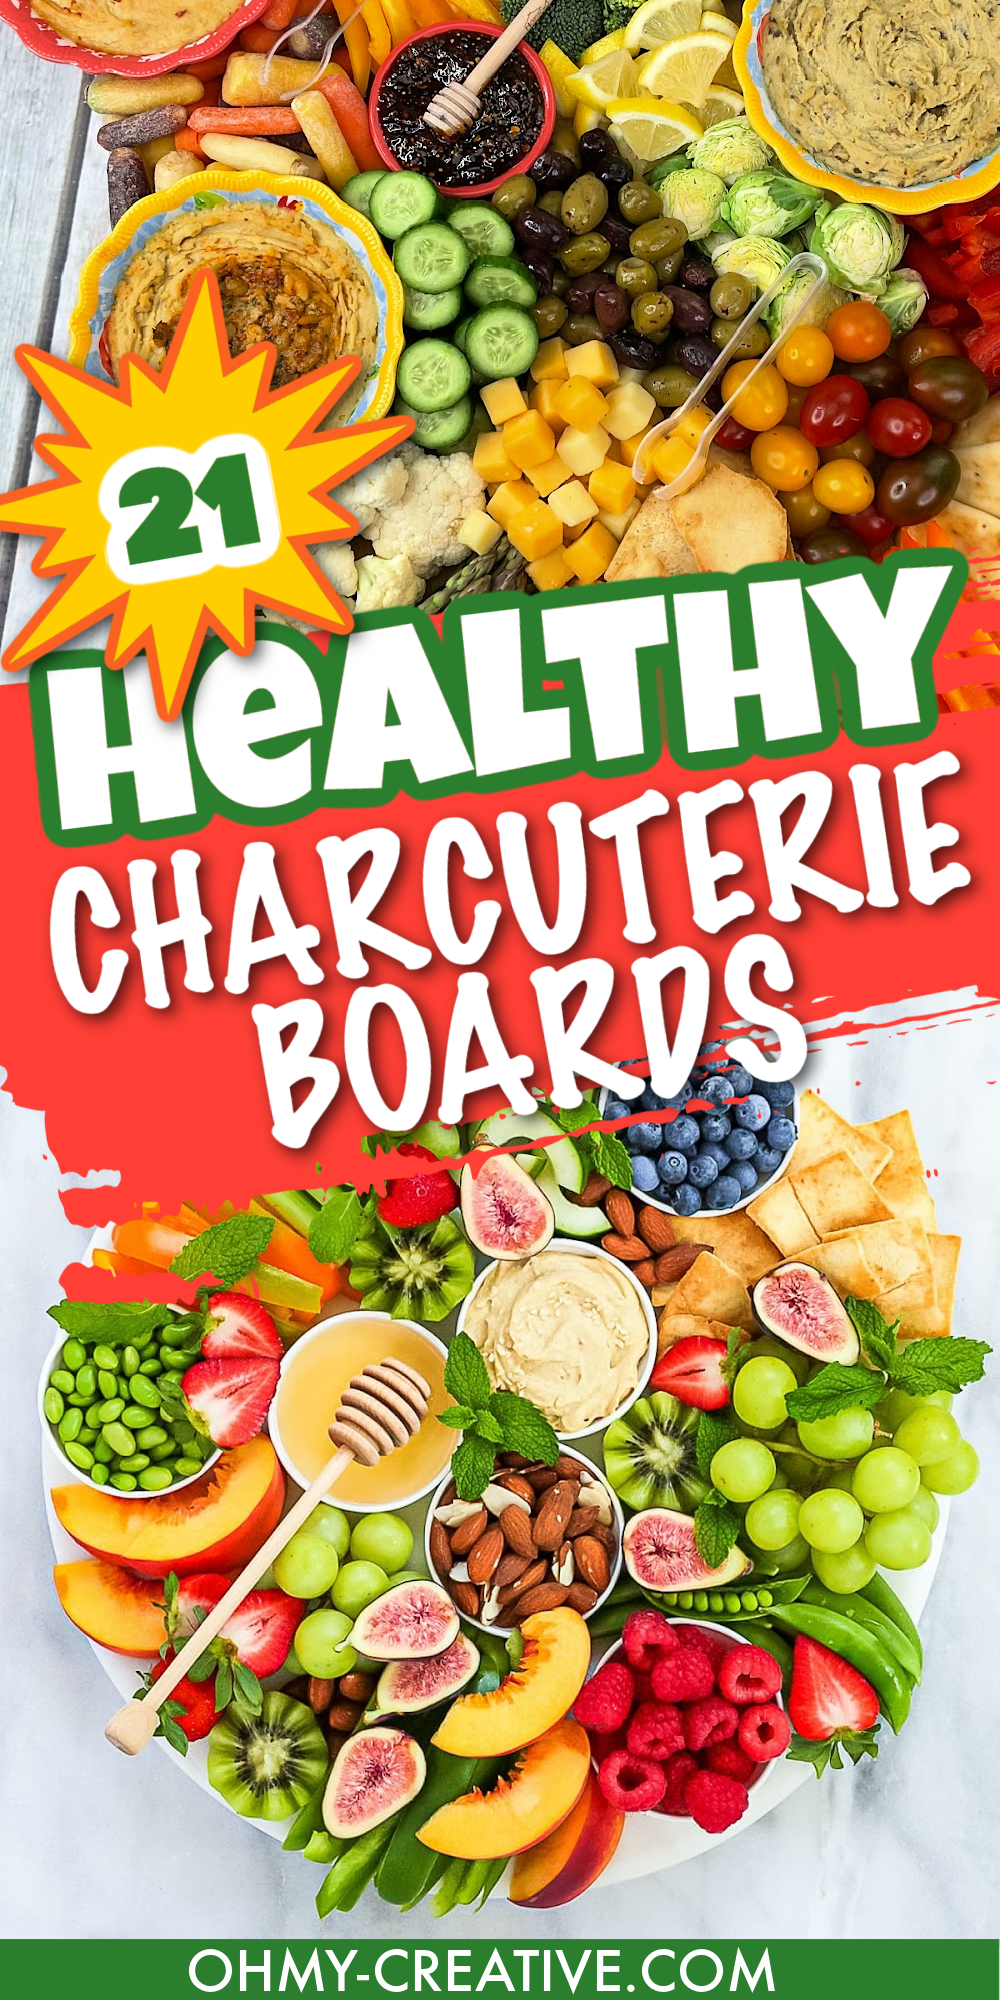 Healthy Charcuterie Boards